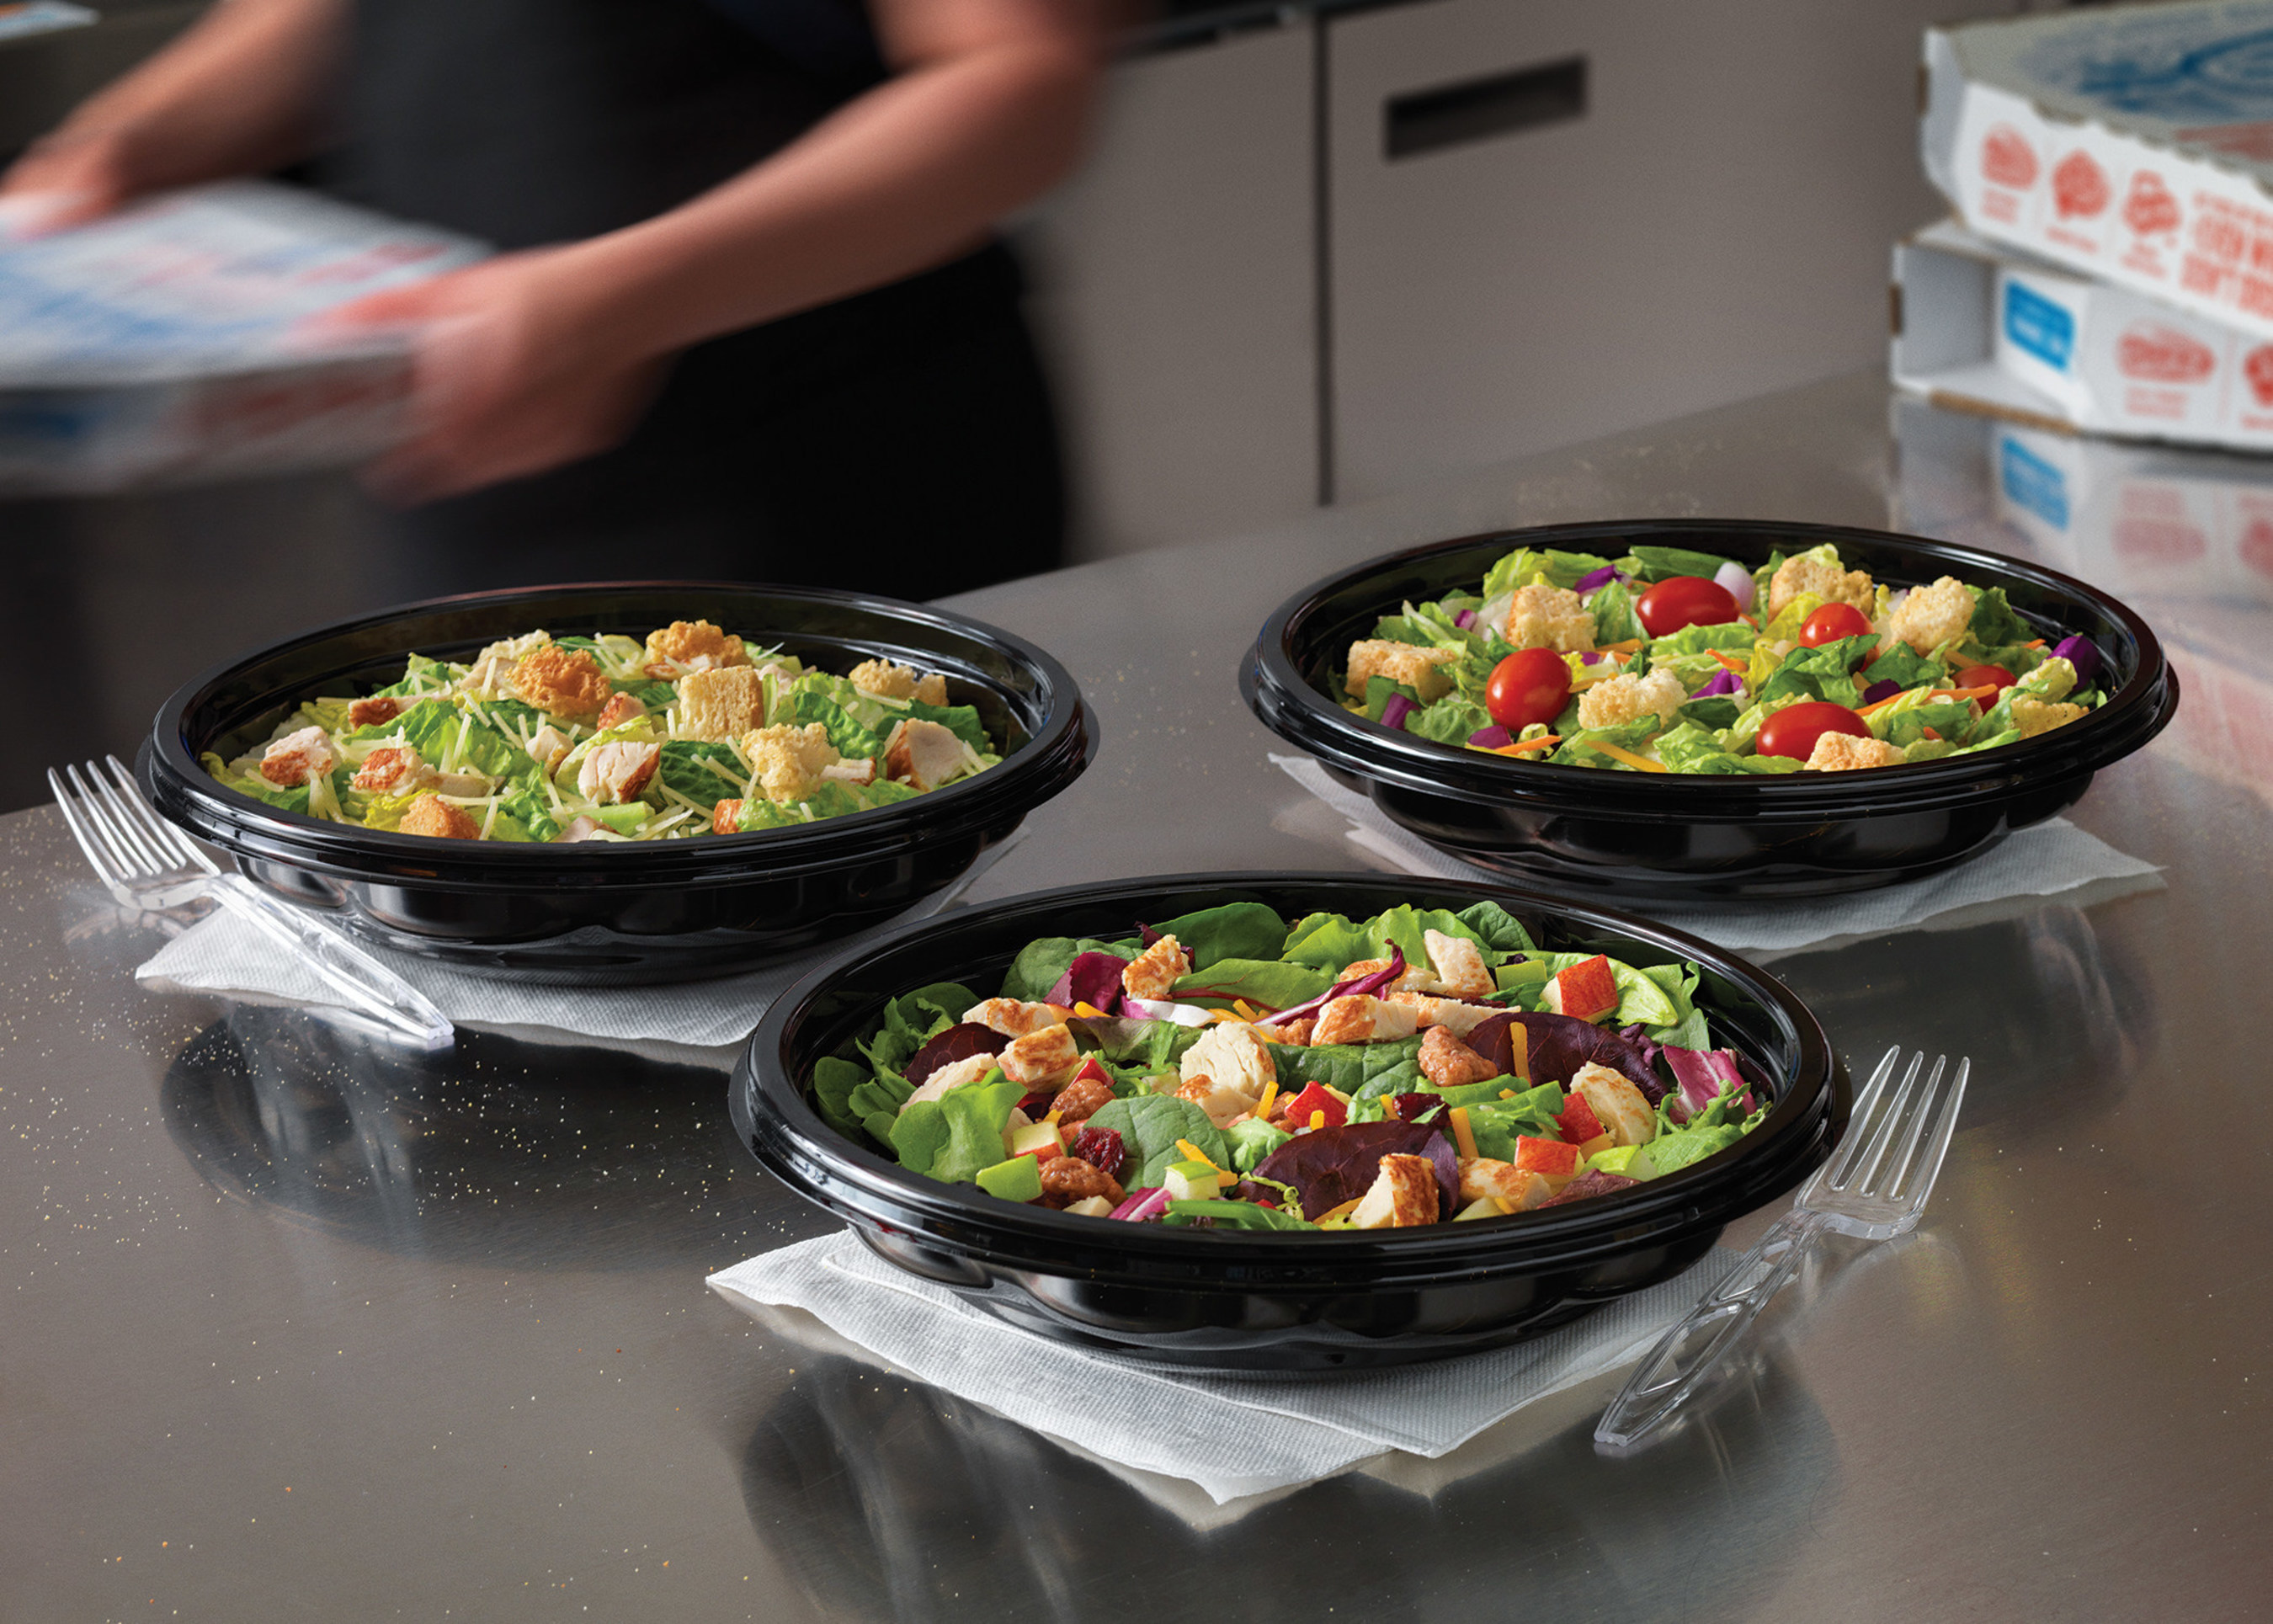 Domino's is now offering salads nationwide. The salads are available in three varieties: Classic Garden, Chicken Caesar and Chicken Apple Pecan.